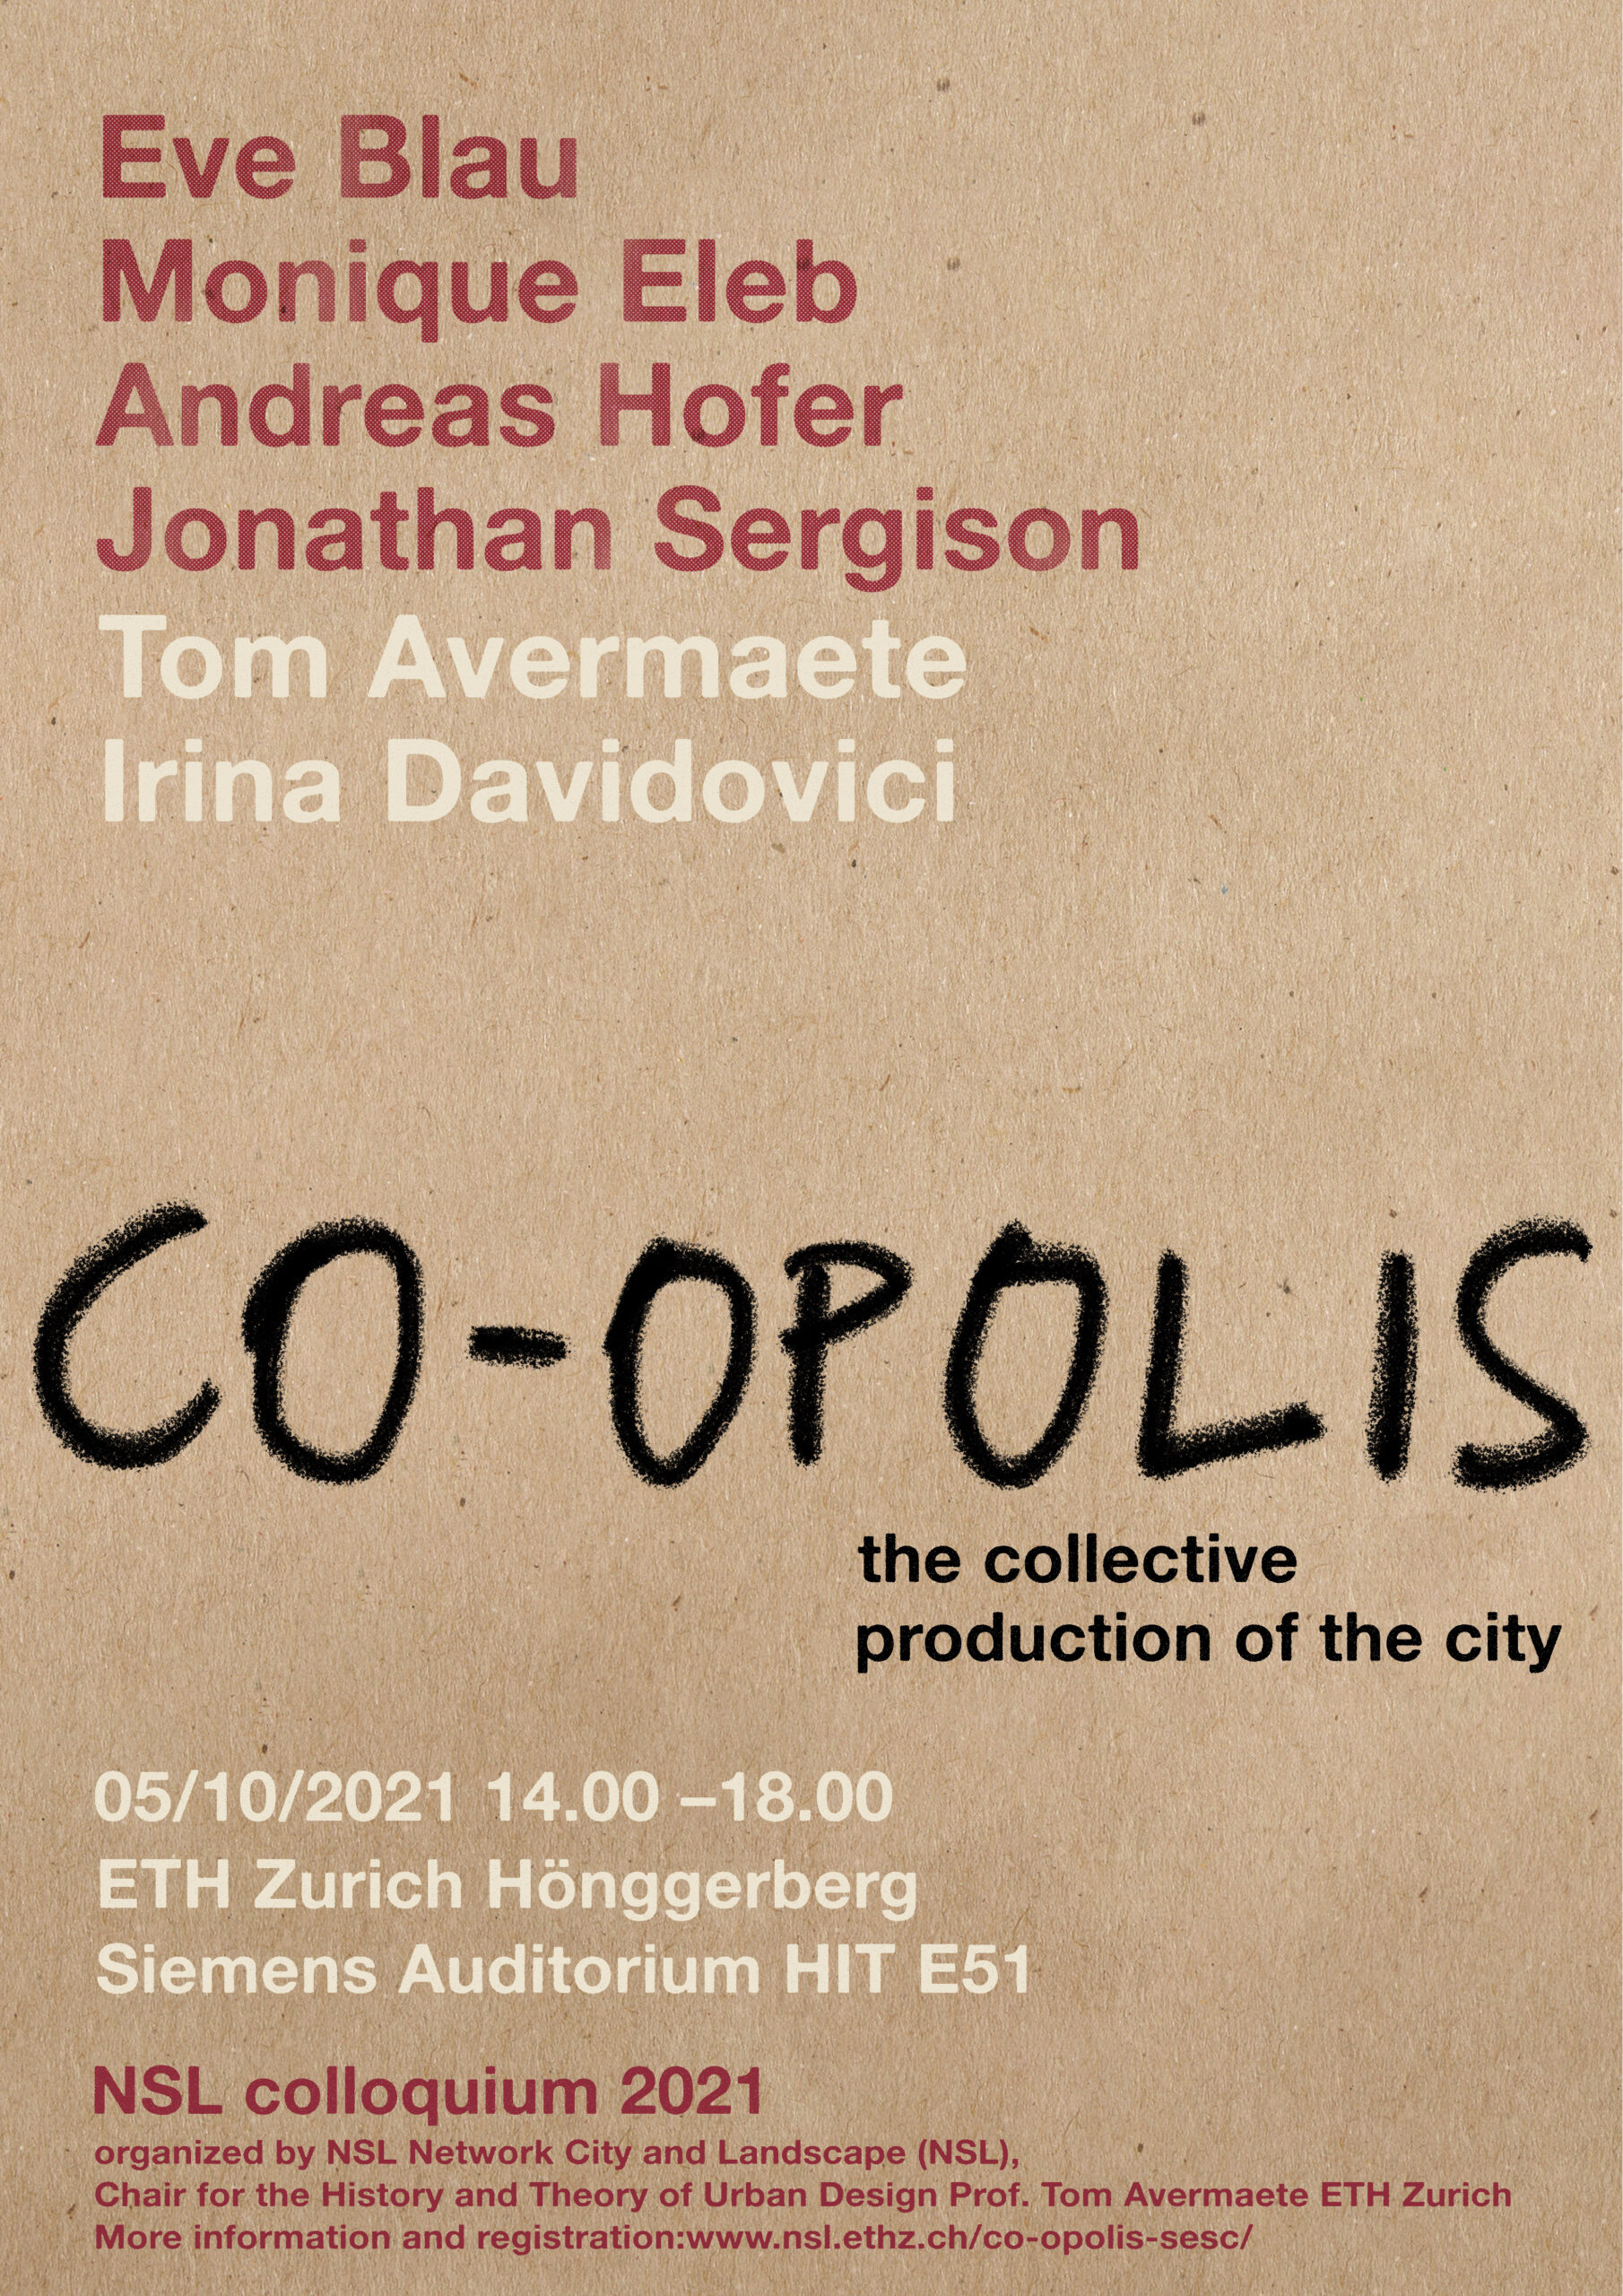 Co-opolis - the collective production of the city